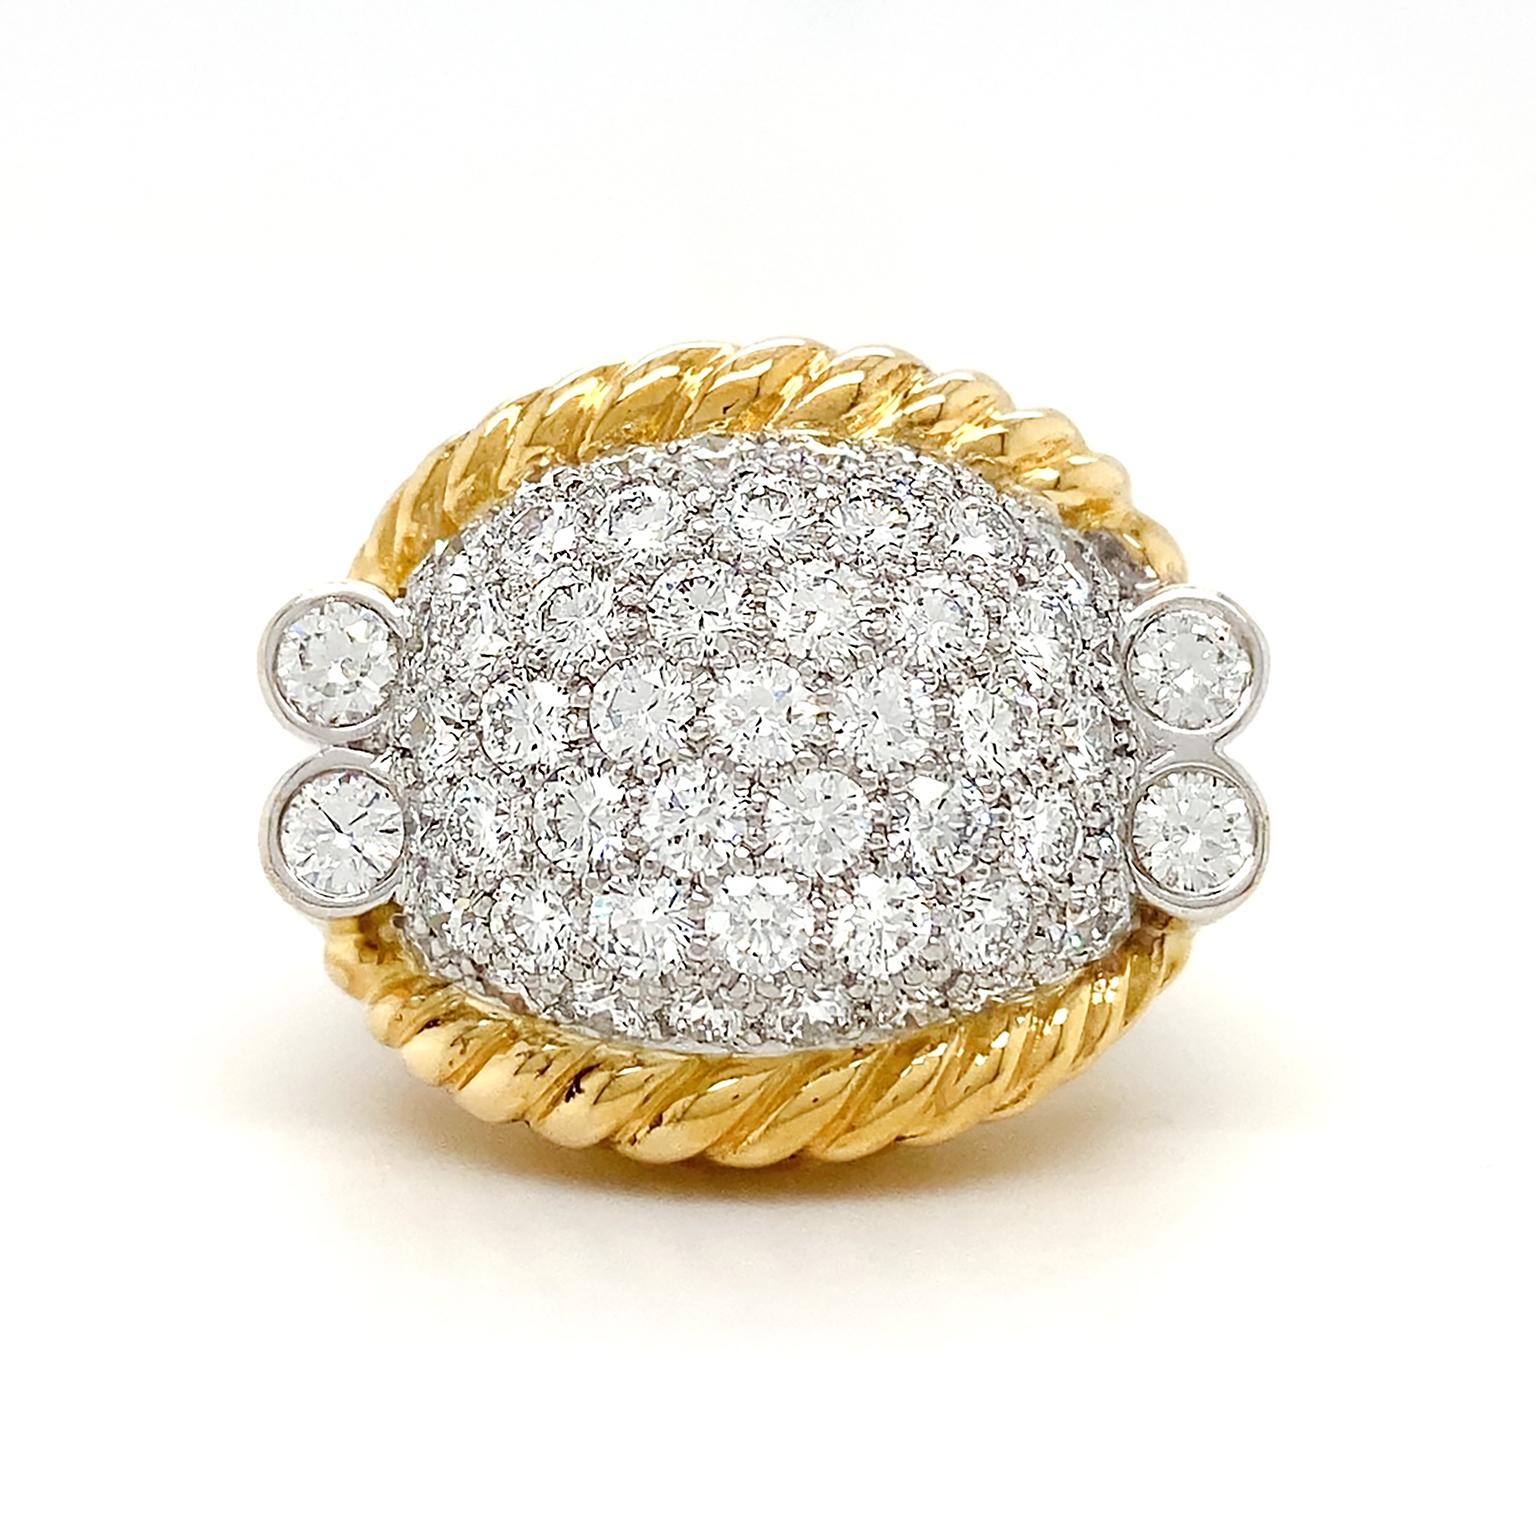 The crest of this ring is a luminance of white light. A raised oval of platinum is encrusted with a collection of brilliant cut diamonds. Along the sides are a trio of stacked 18k yellow gold ropes. A double band with platinum set diamond tips